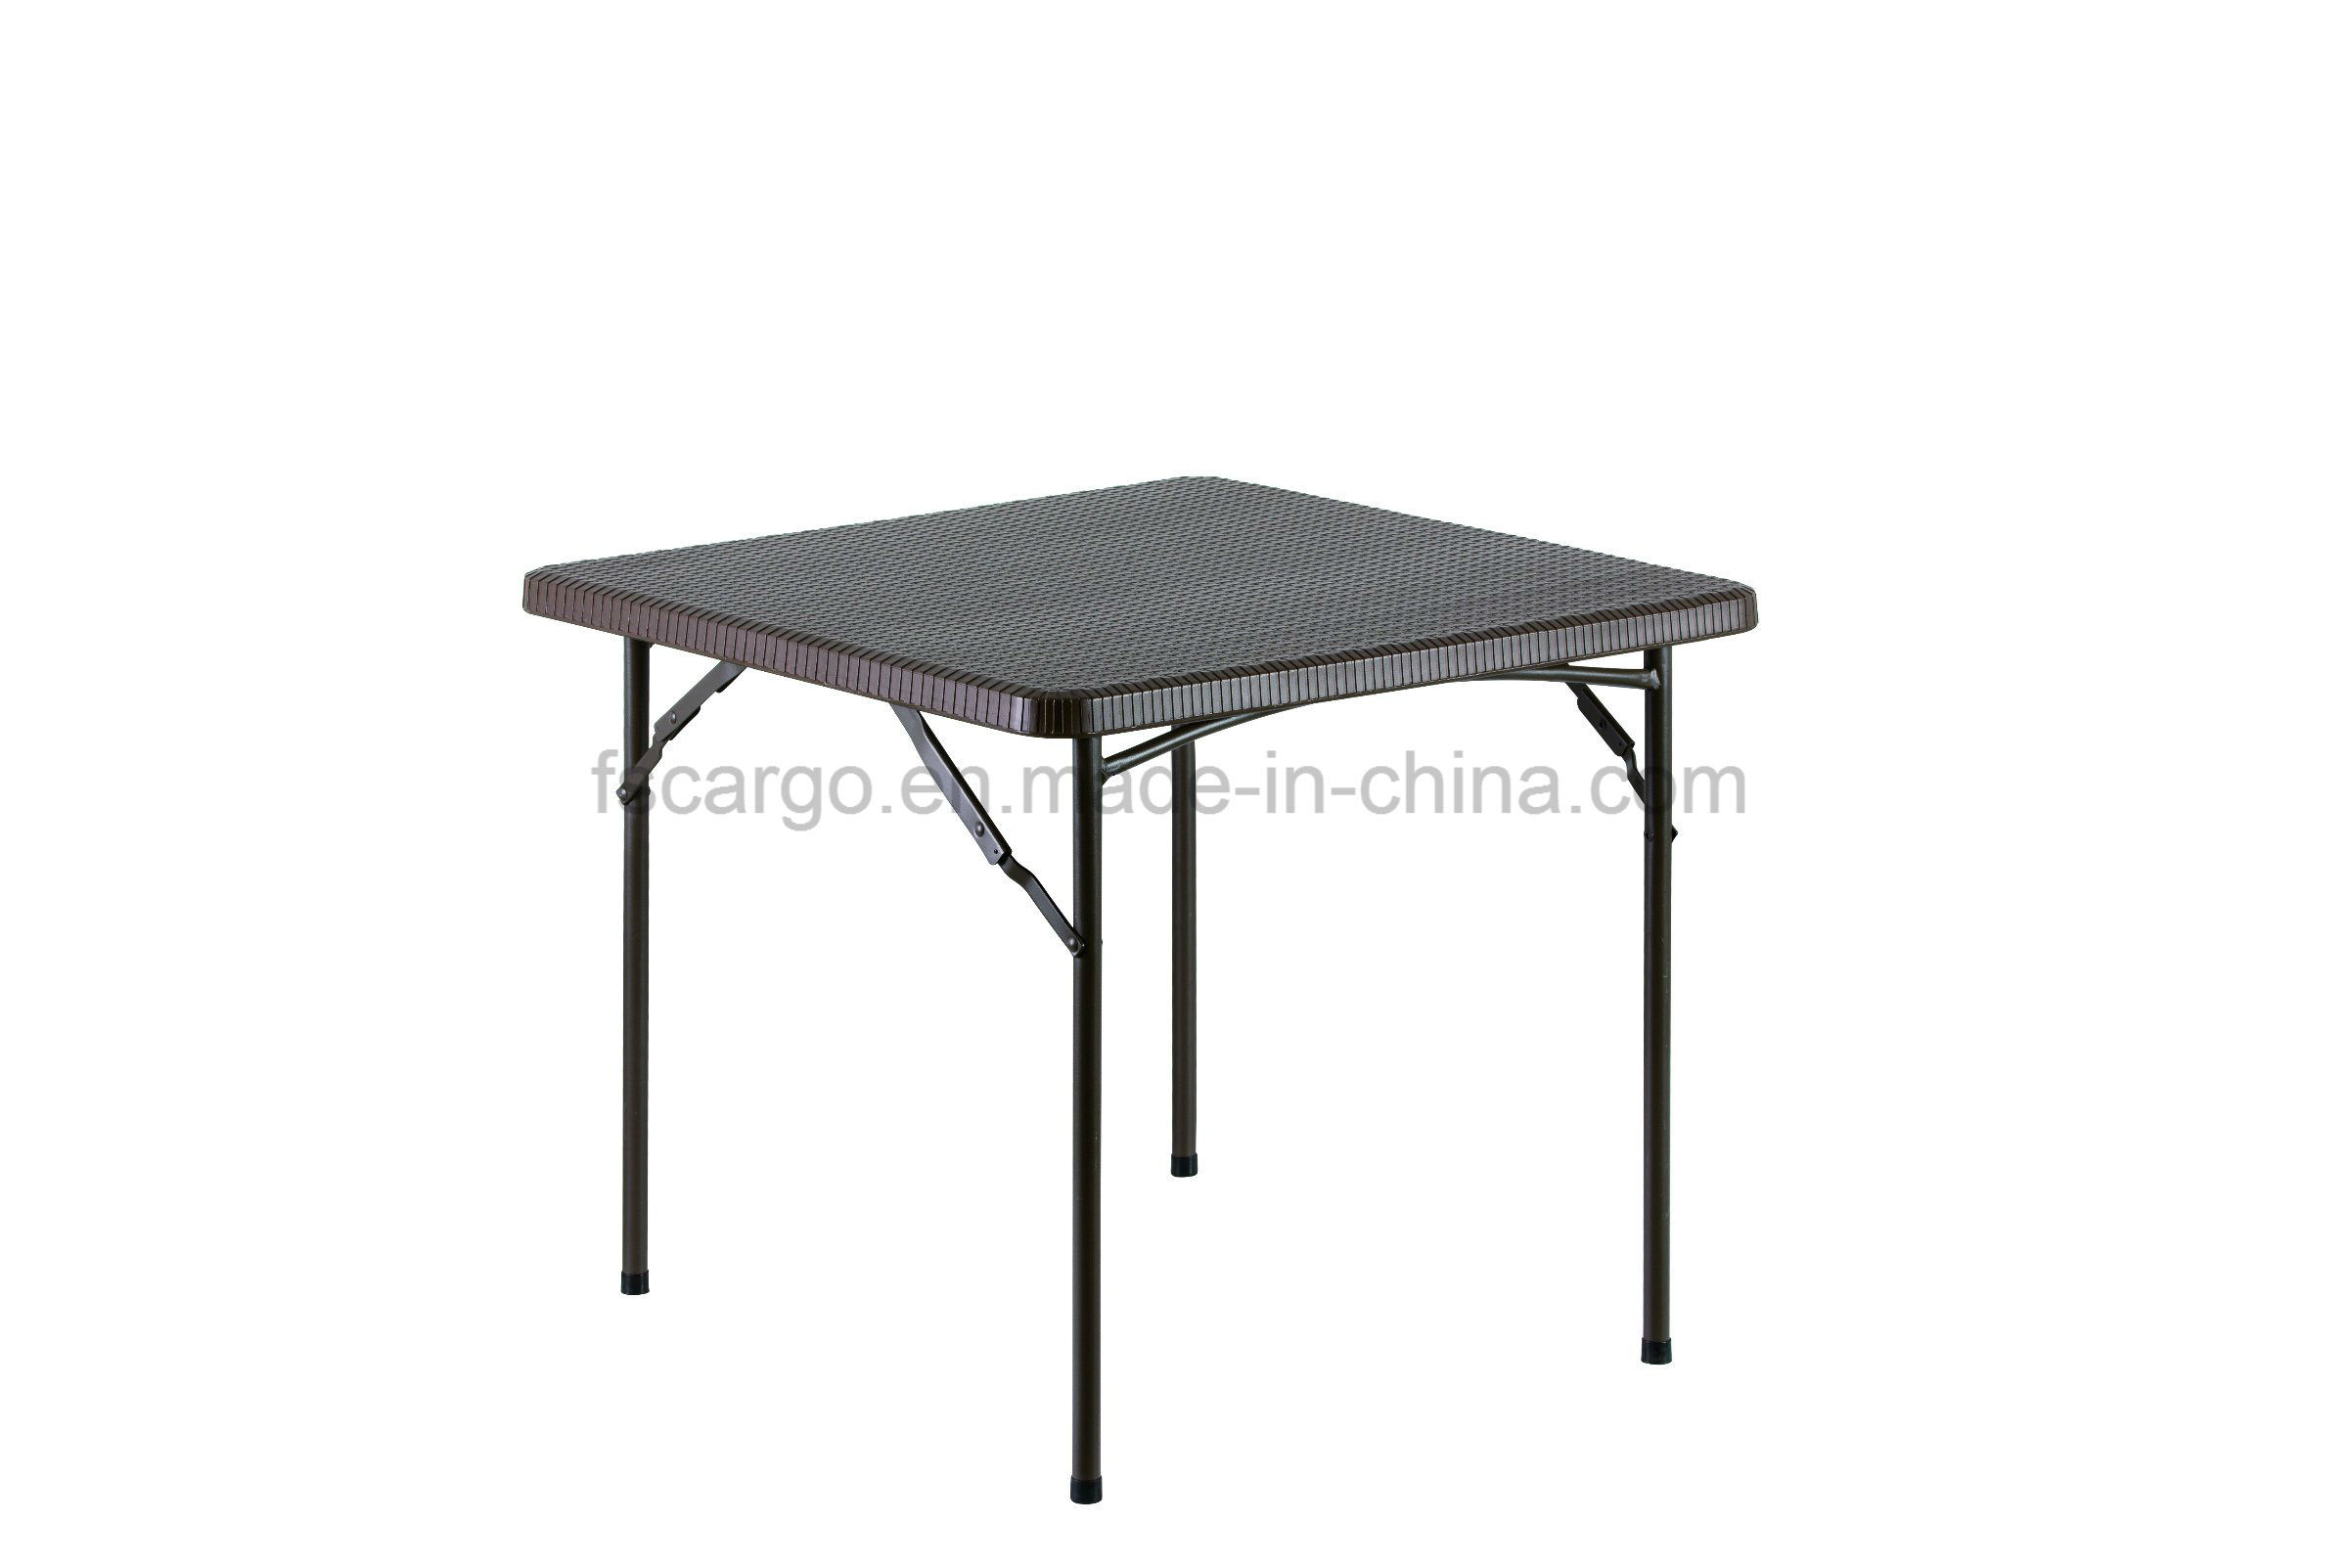 Imitated Rattan Finished Square Folding Table for Picnic Used (CG-R86)